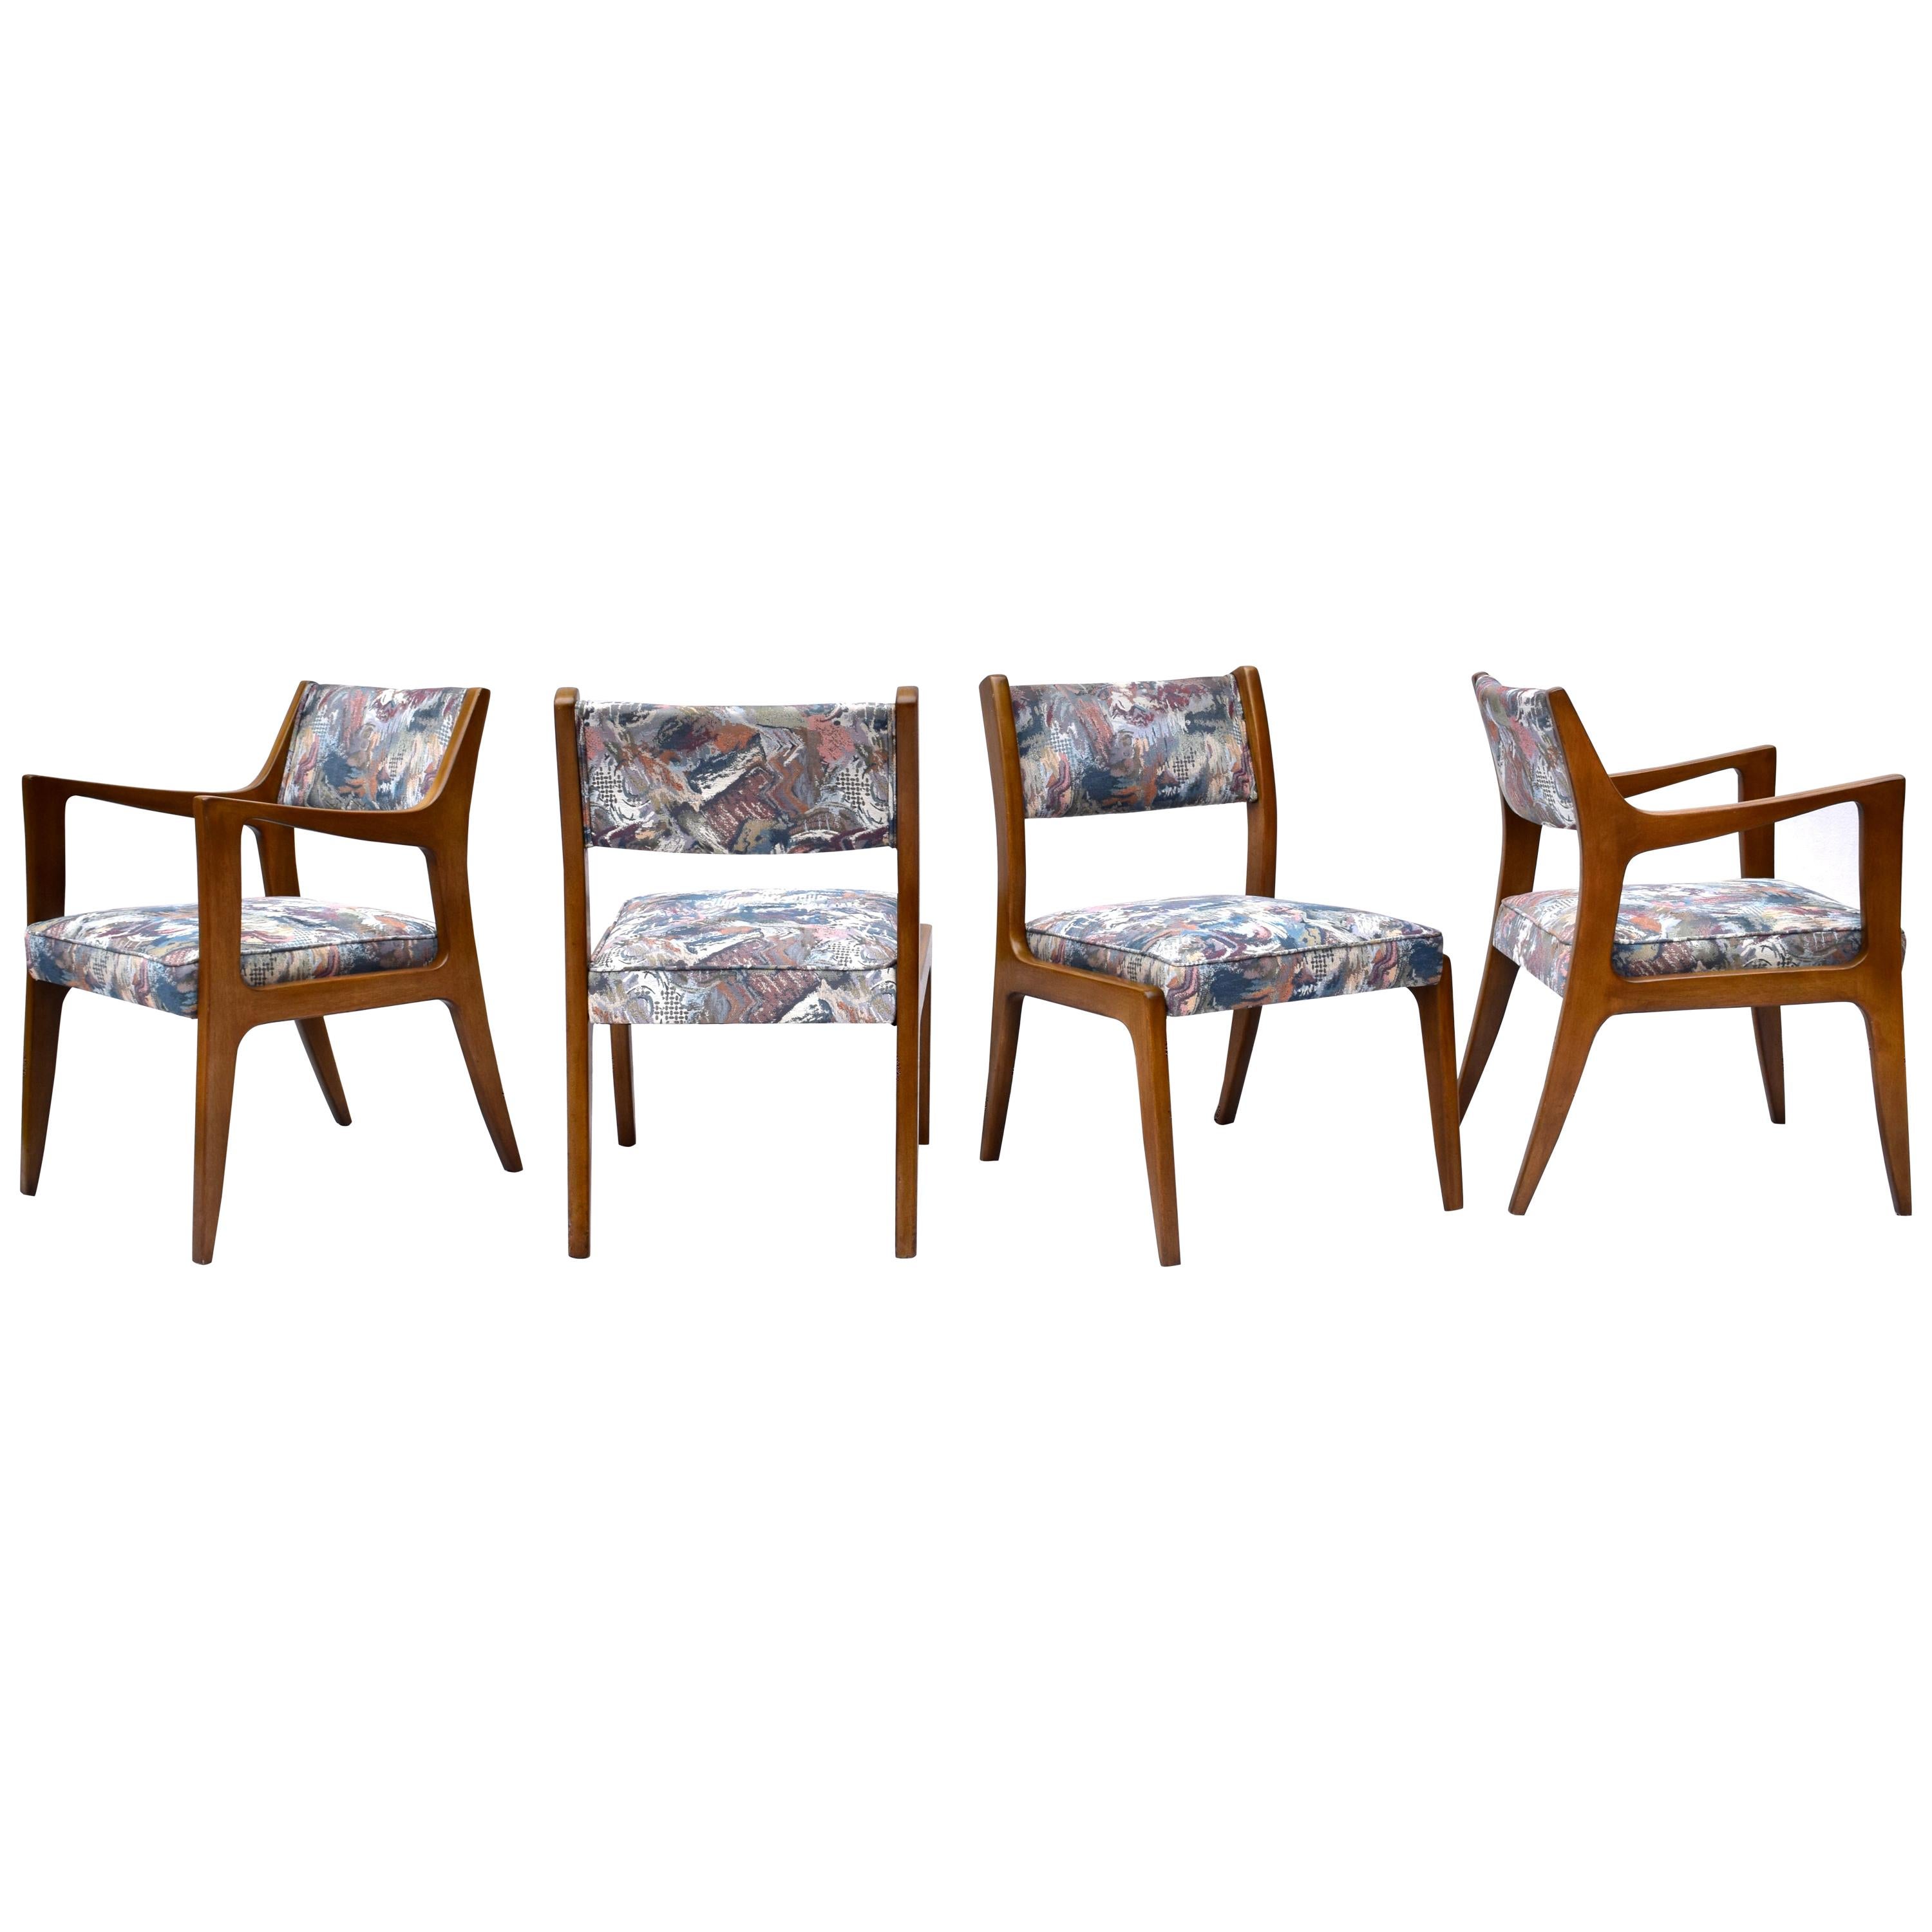 Set of Four Harvey Probber Mahogany Dining Chairs, 1950s